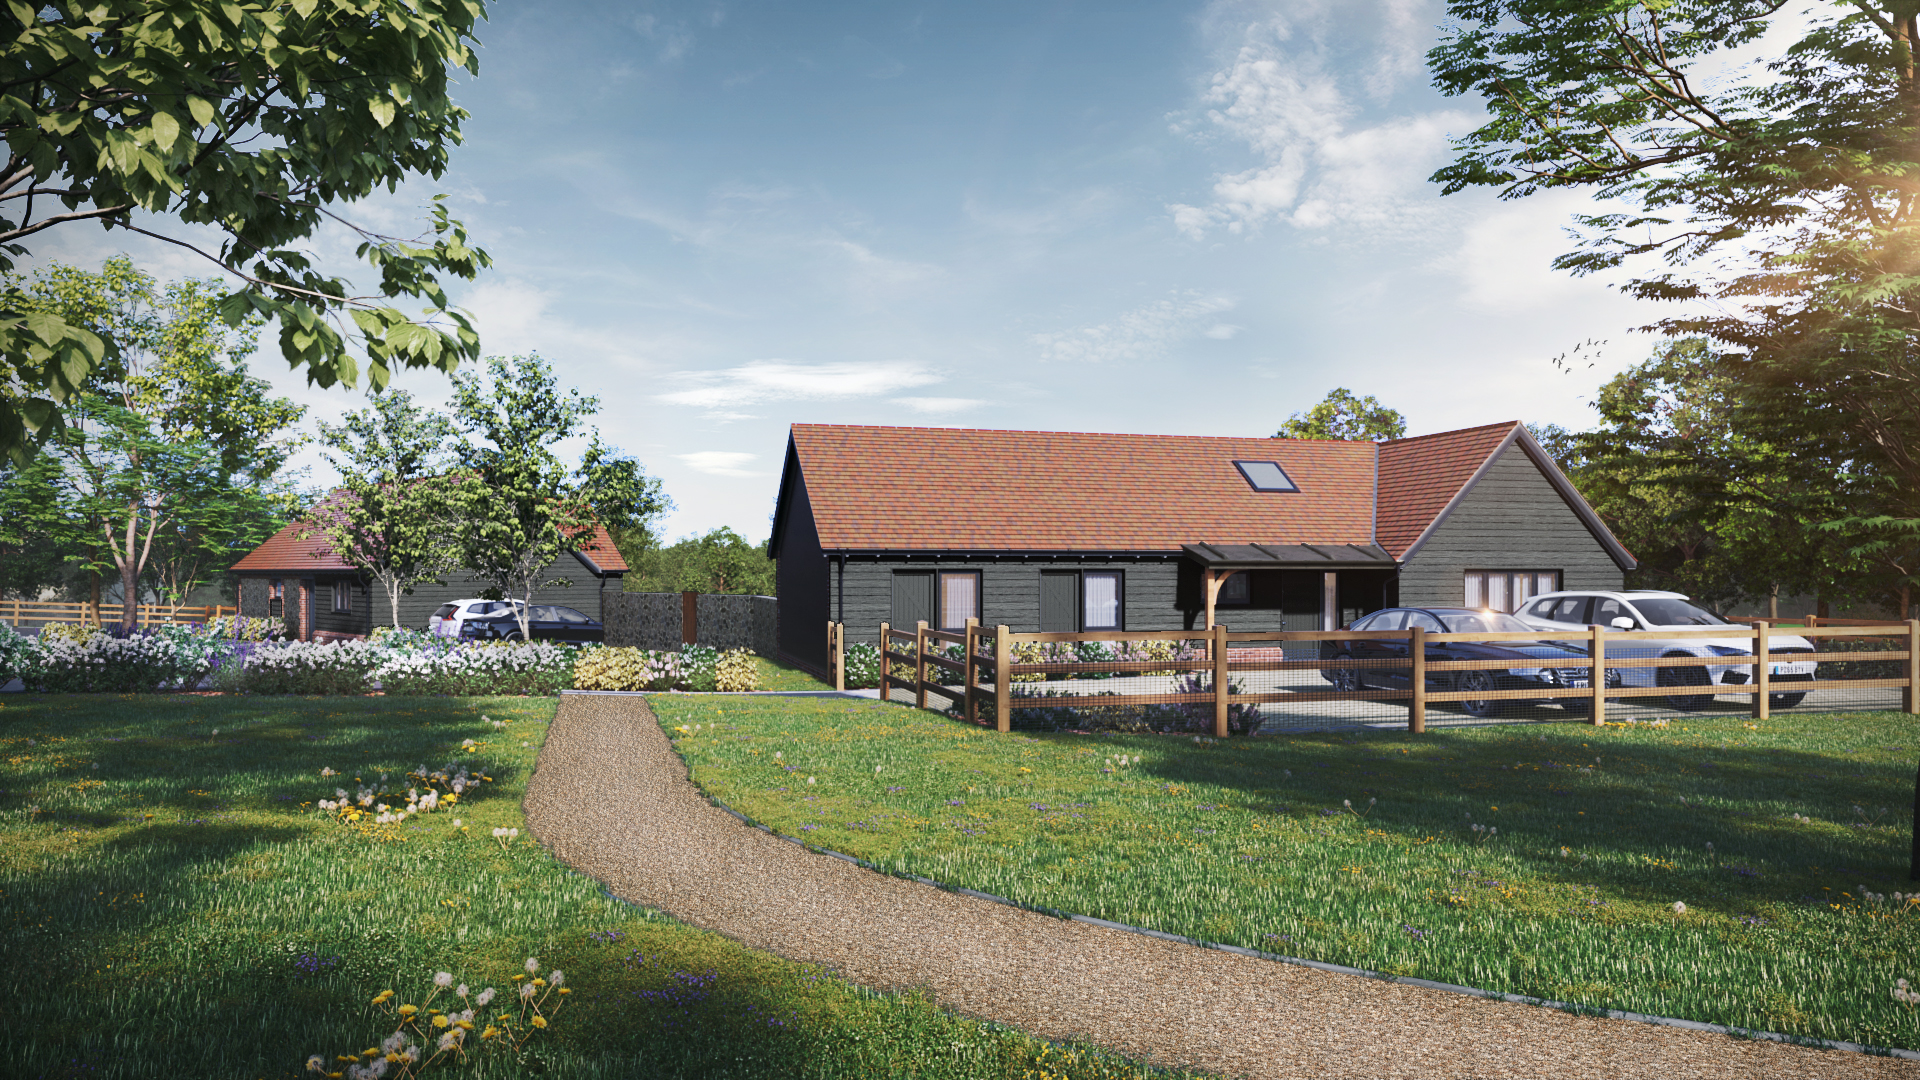 CGI of bungalow with red roof tiles, and grey cladding. A path with grass either side leading up to it, and picket fence surrounding drive.